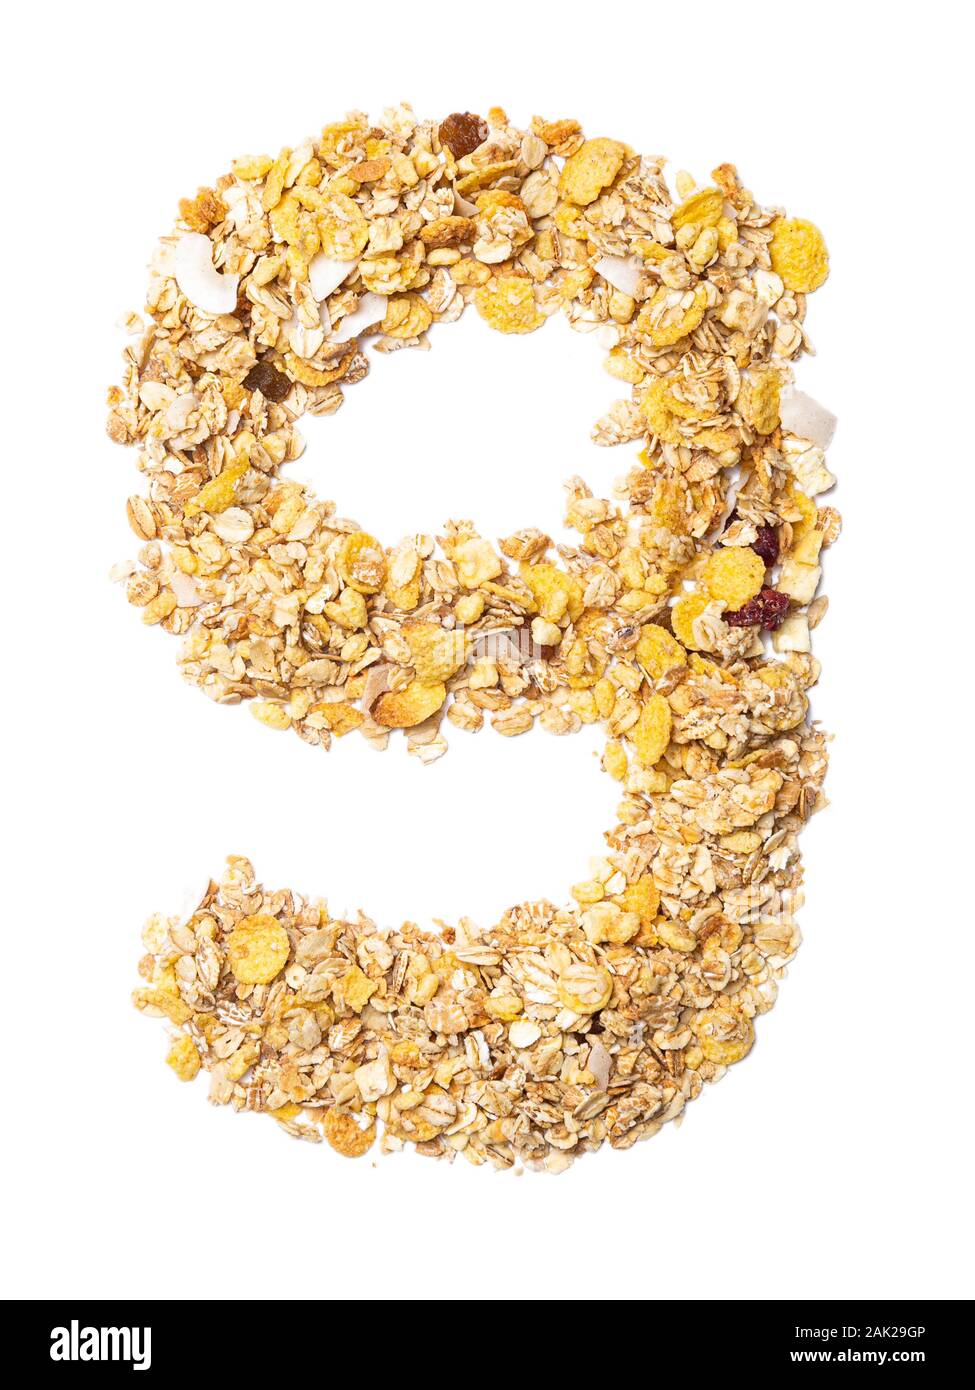 Arabic numeral "9"   from muesli with coconut, berries, raisins, cereal and natural cereals  on a white isolated background. Food pattern made from gr Stock Photo